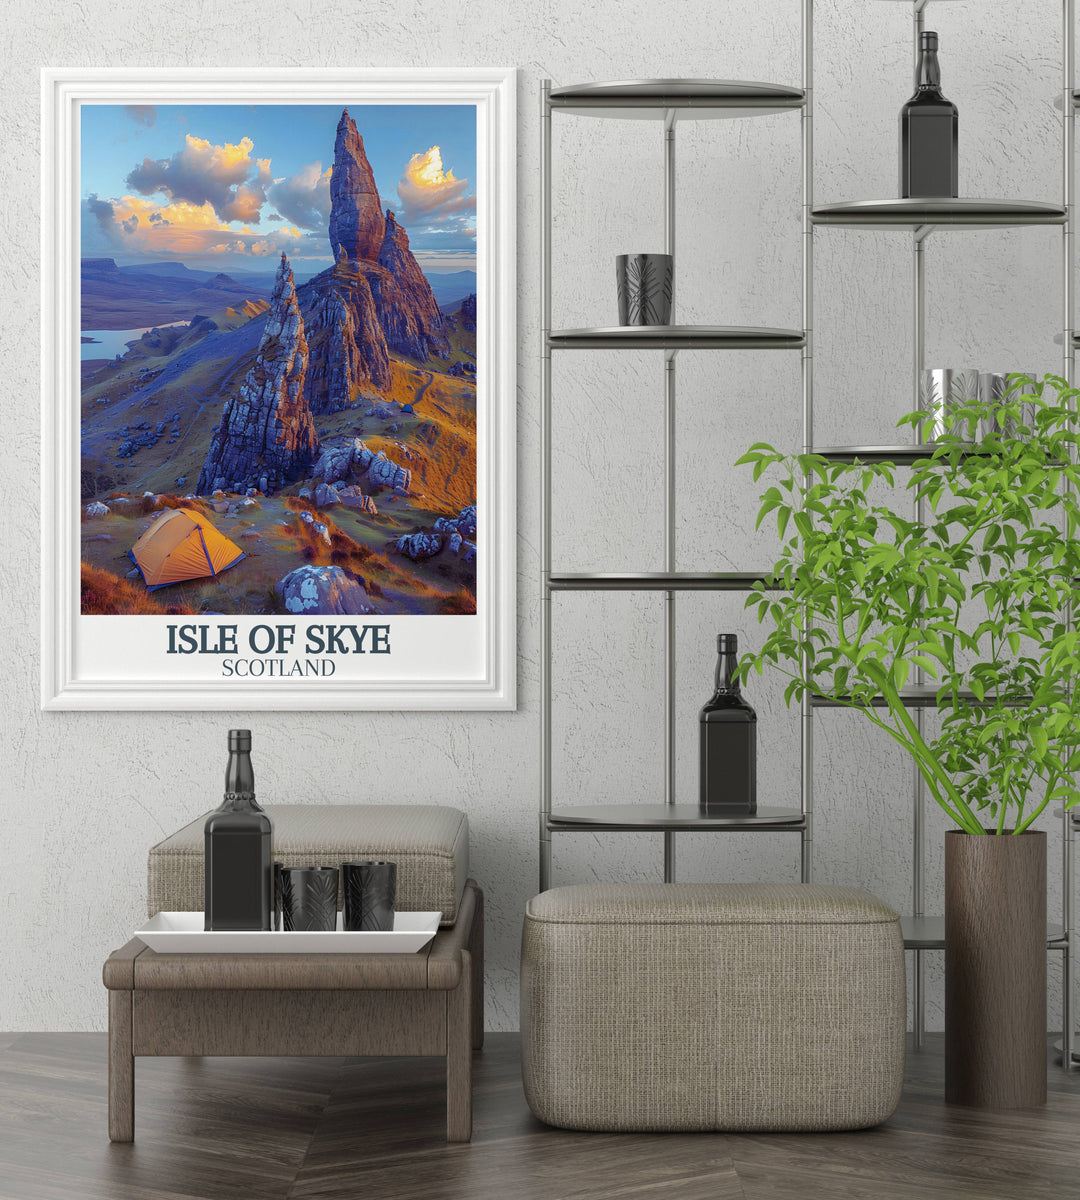 Artistic representation of The Old Man of Storr in a custom print emphasizing the unique geology of Skye